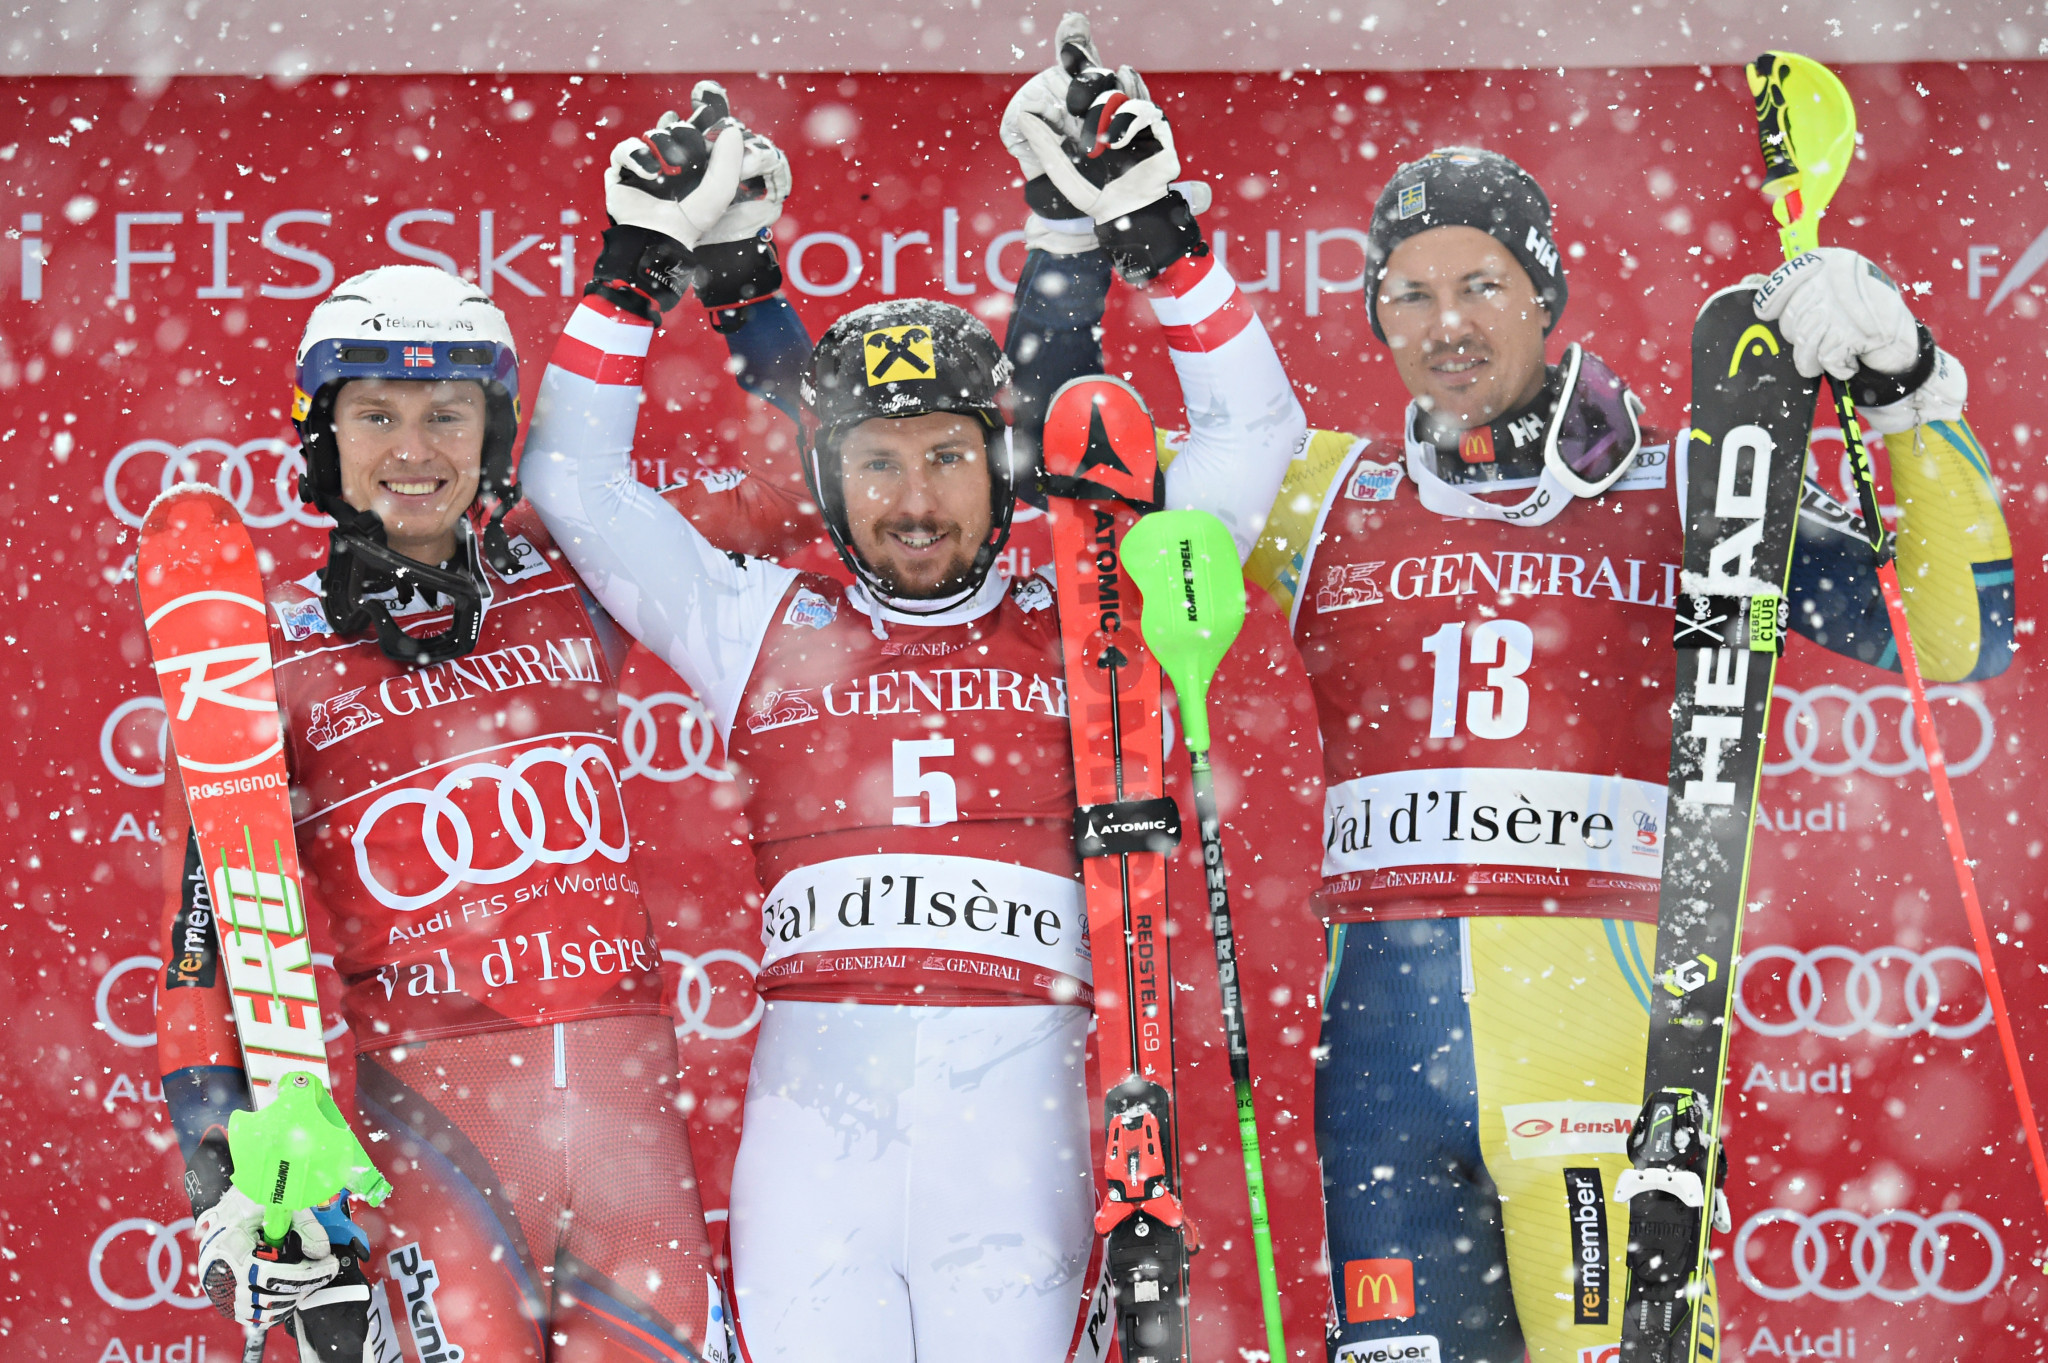 Henrik Kristoffersen, of Norway, takes second place, Marcel Hirscher, of Austria, first place and Andre Myhrer, of Sweden, third place during the FIS Alpine Ski World Cup men's slalom in Val-d'Isere ©Getty Images